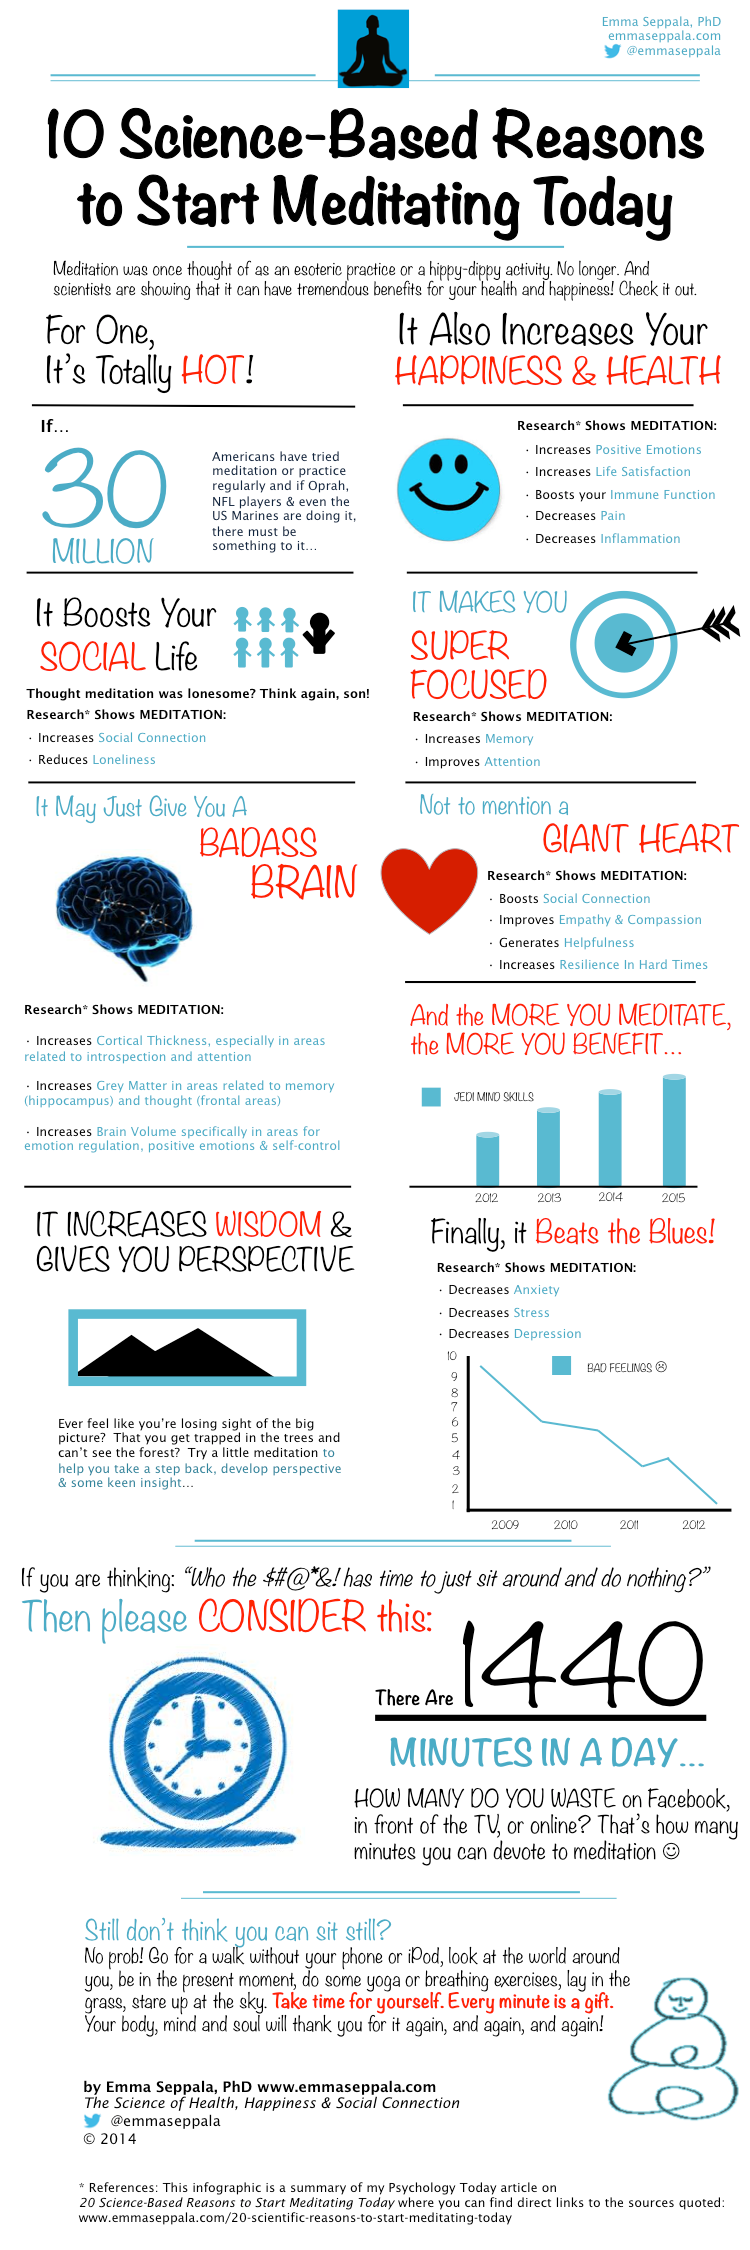 10-Science-Based-Reasons-To-Start-Meditating-Today-INFOGRAPHIC.png